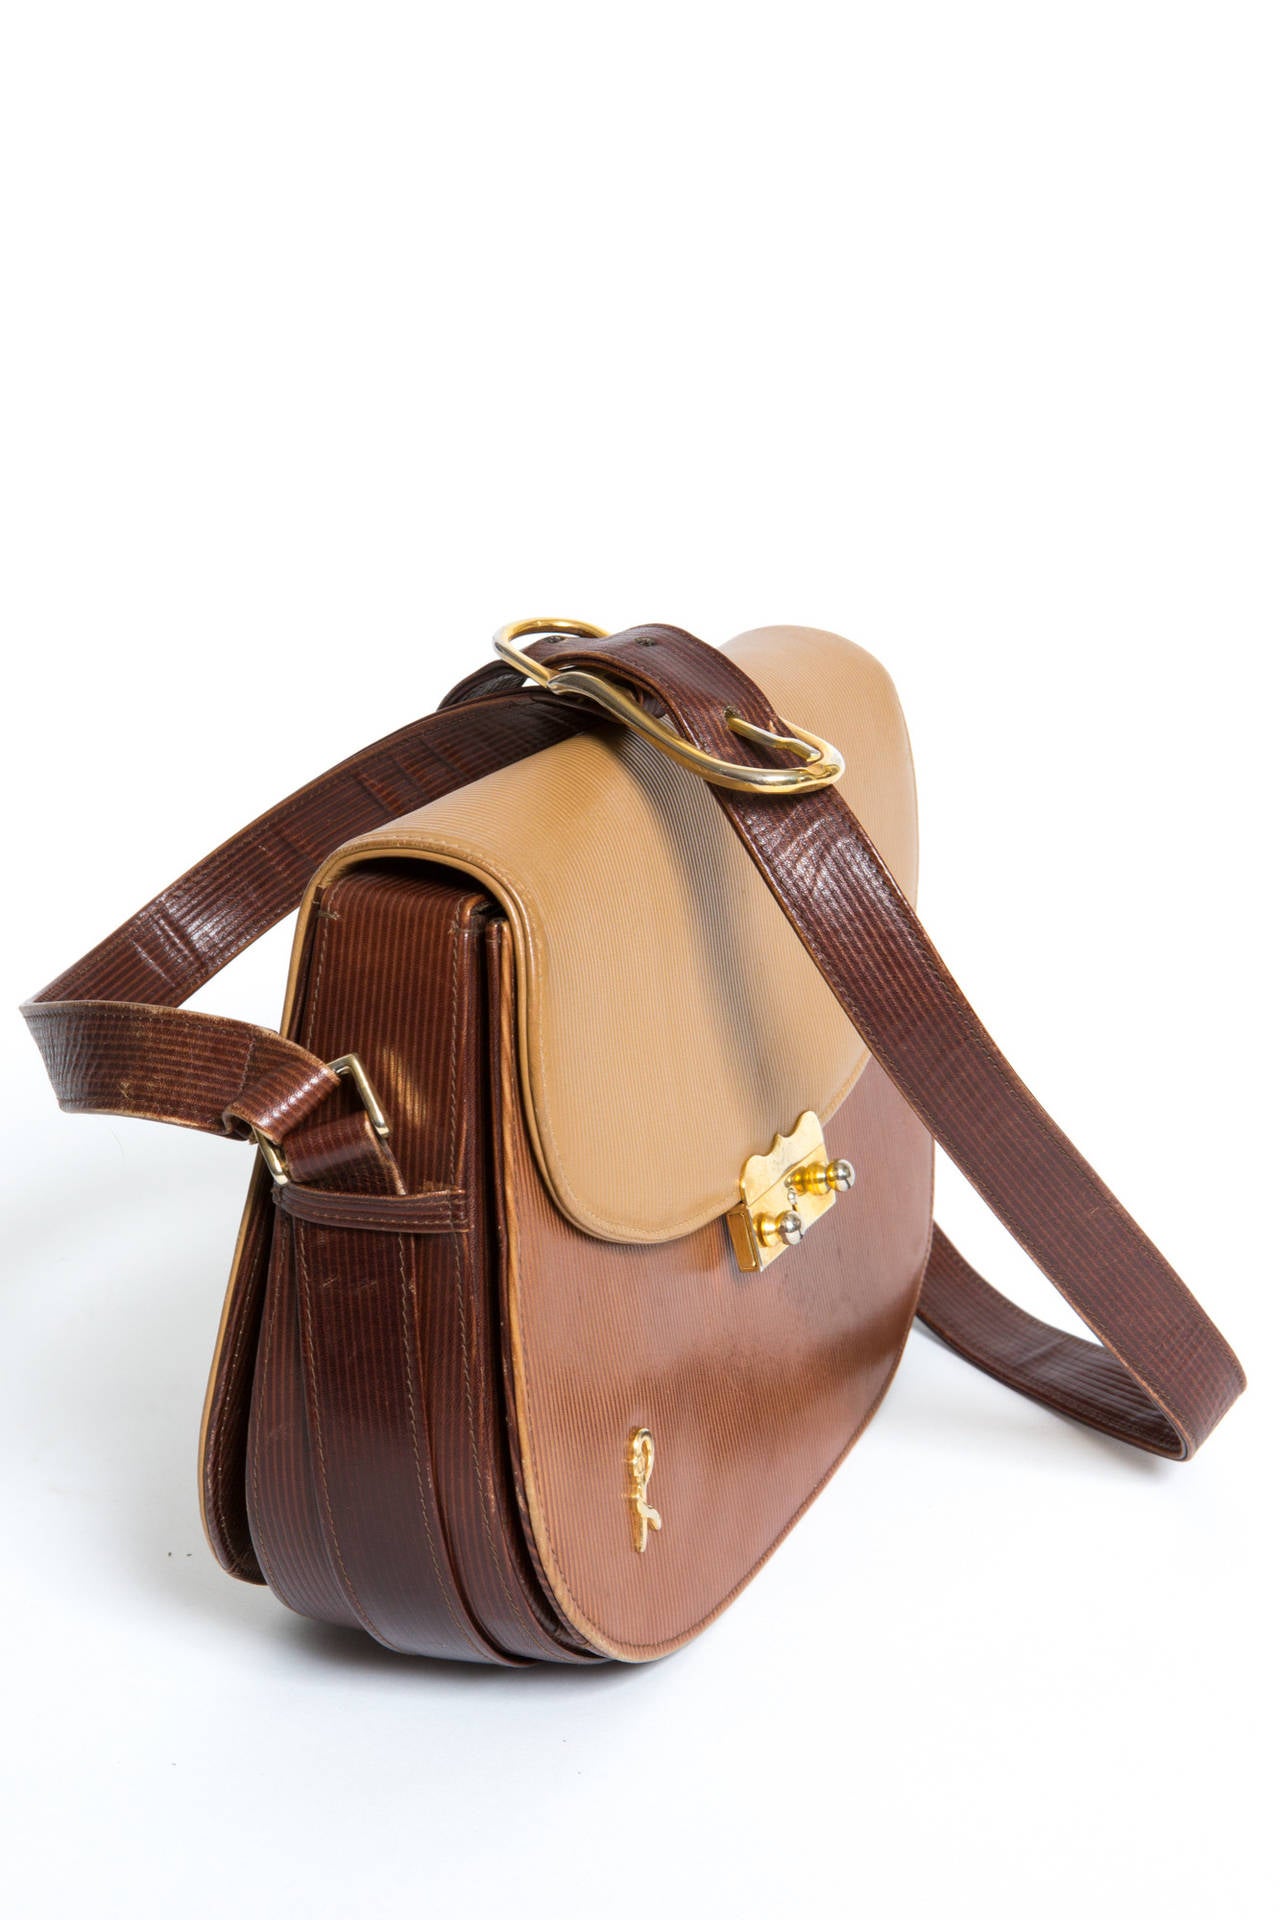 Wonderful crossbody tricolor textured leather large saddle bag from Roberta Di Camerino, adorned with the Camerino logo and a gorgeous gold-tone front clasp opening. The bag gets a long adjustable strap ( 96cm)